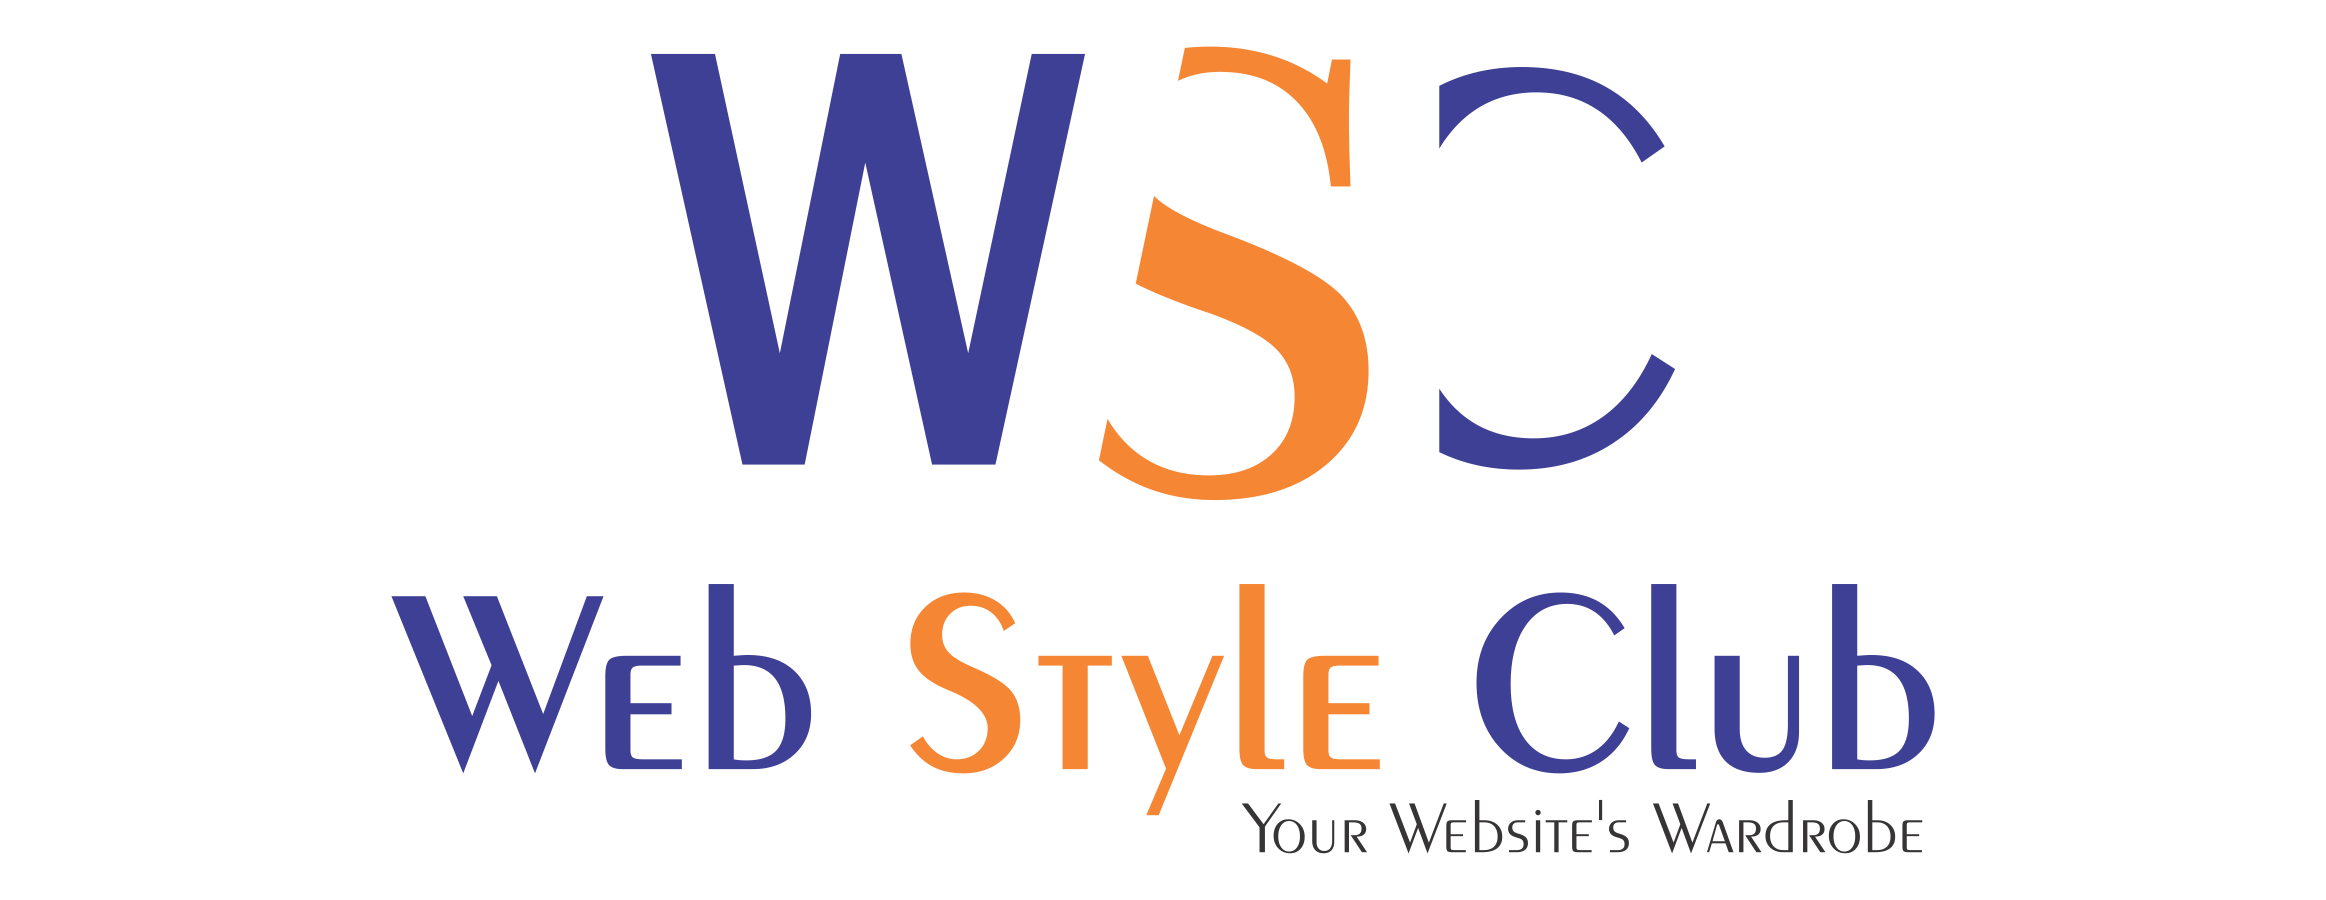 Web Style Club profile on Qualified.One